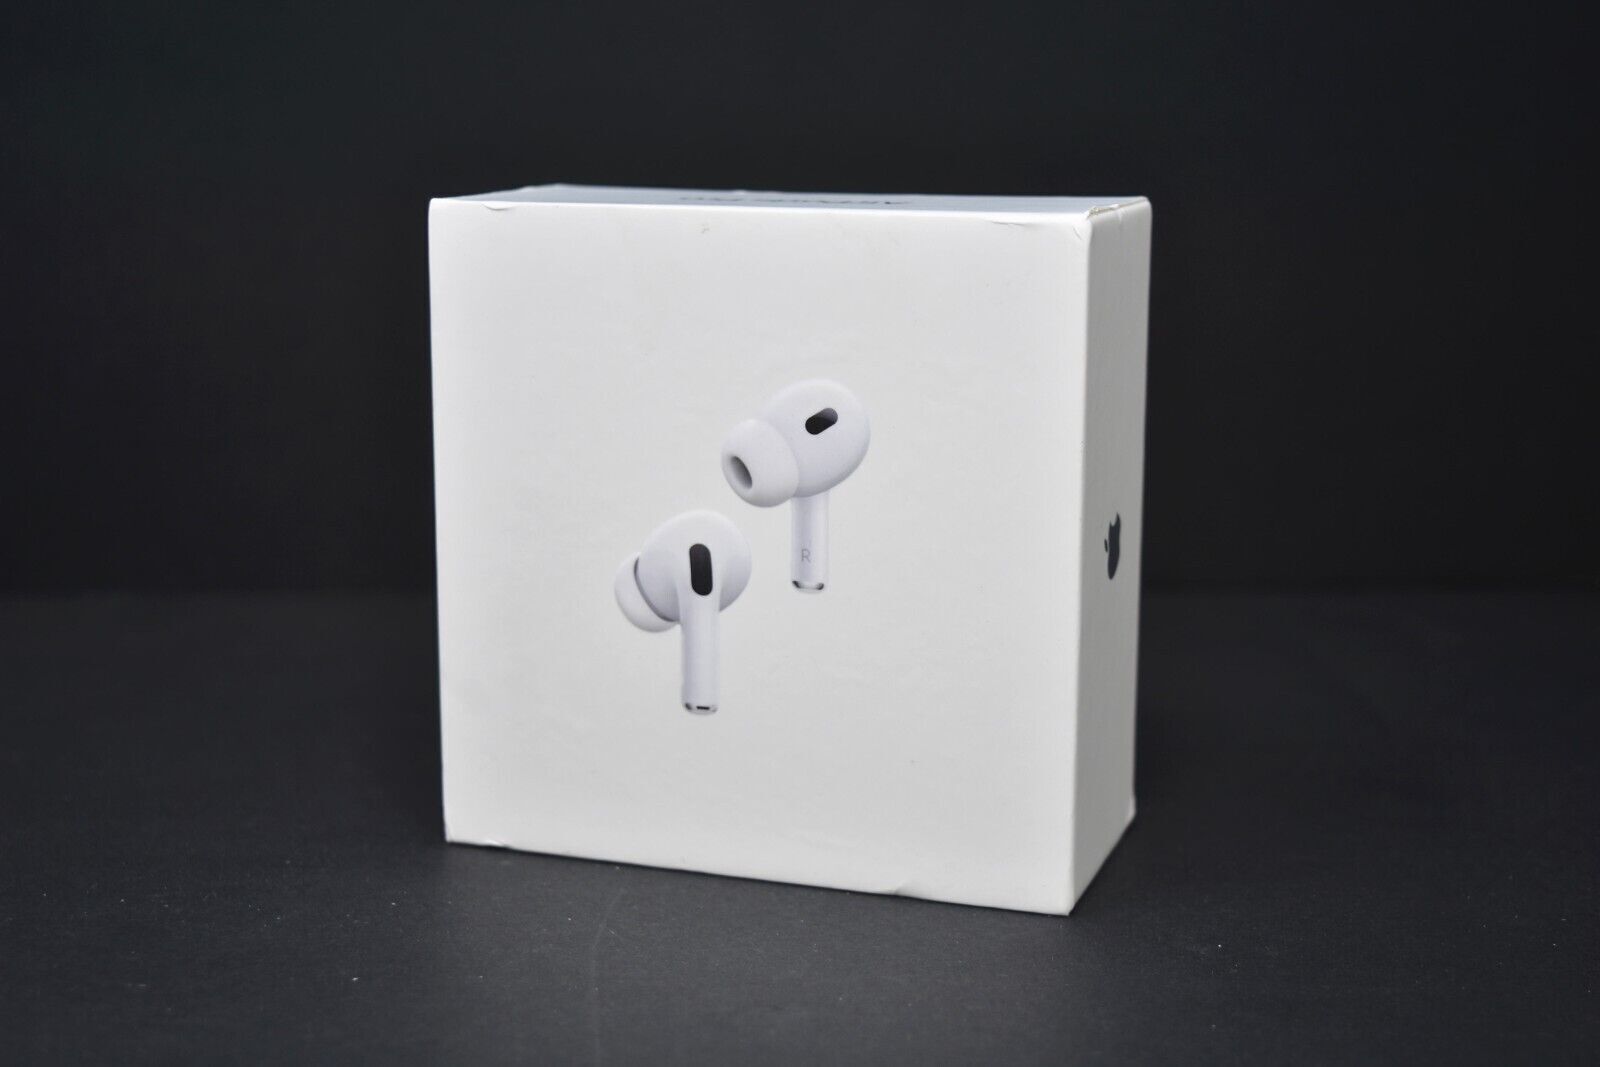 AppIe AirPods Pro (2nd Generation) Earphone Wireless with Charging Case 